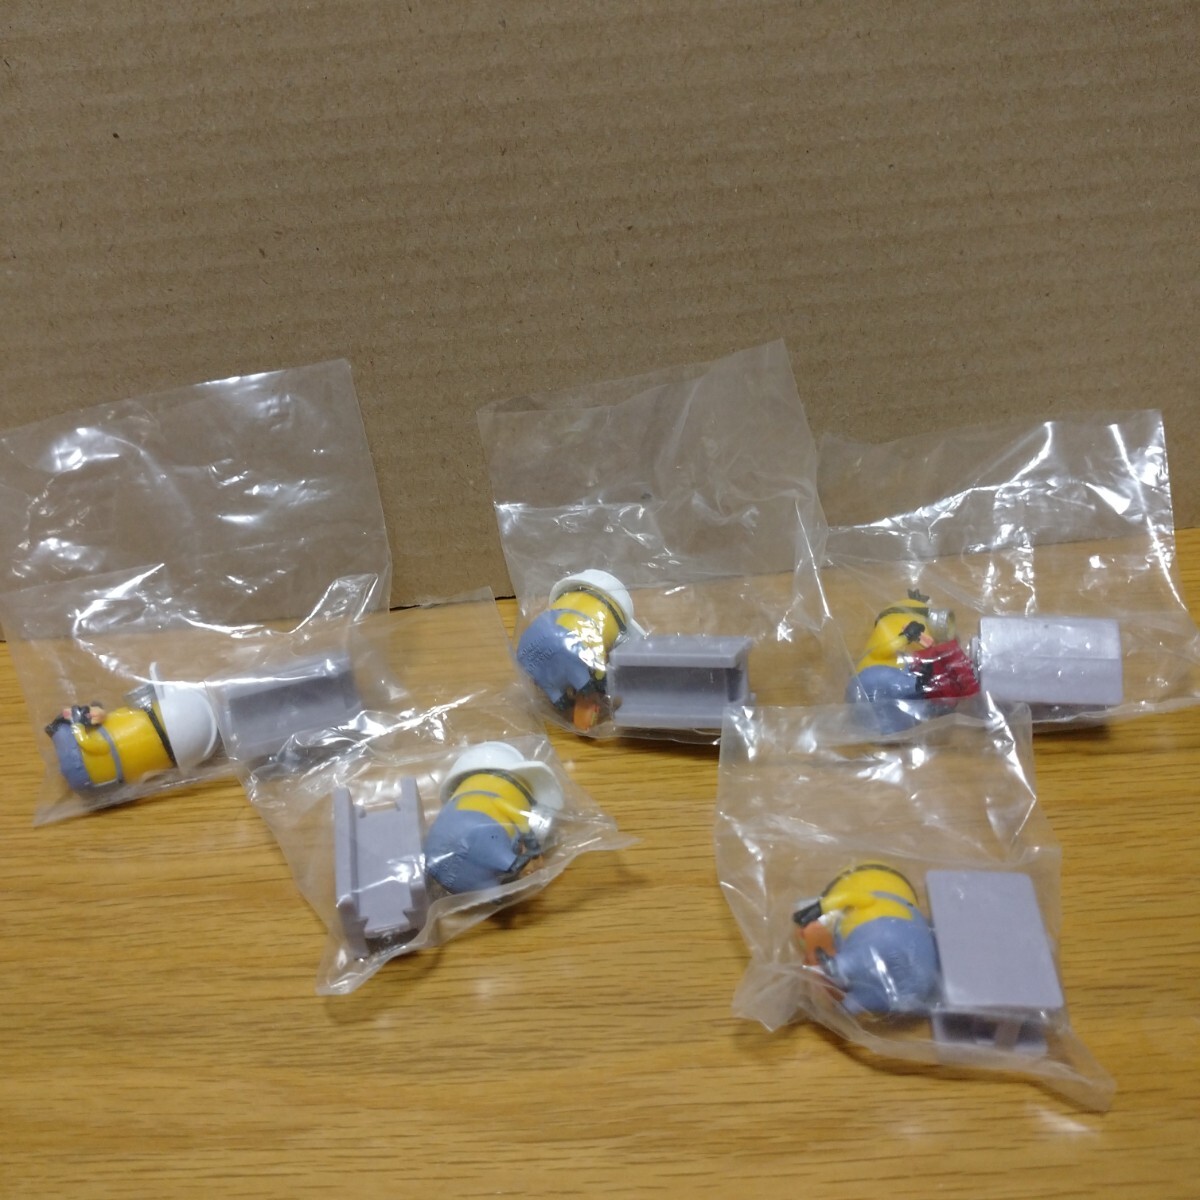 minions minion 工事現場 工事 工場 作業員 フィギュア コレクション ミニオンズ ミニオン パン ご飯 collection toy lunch time figureの画像9